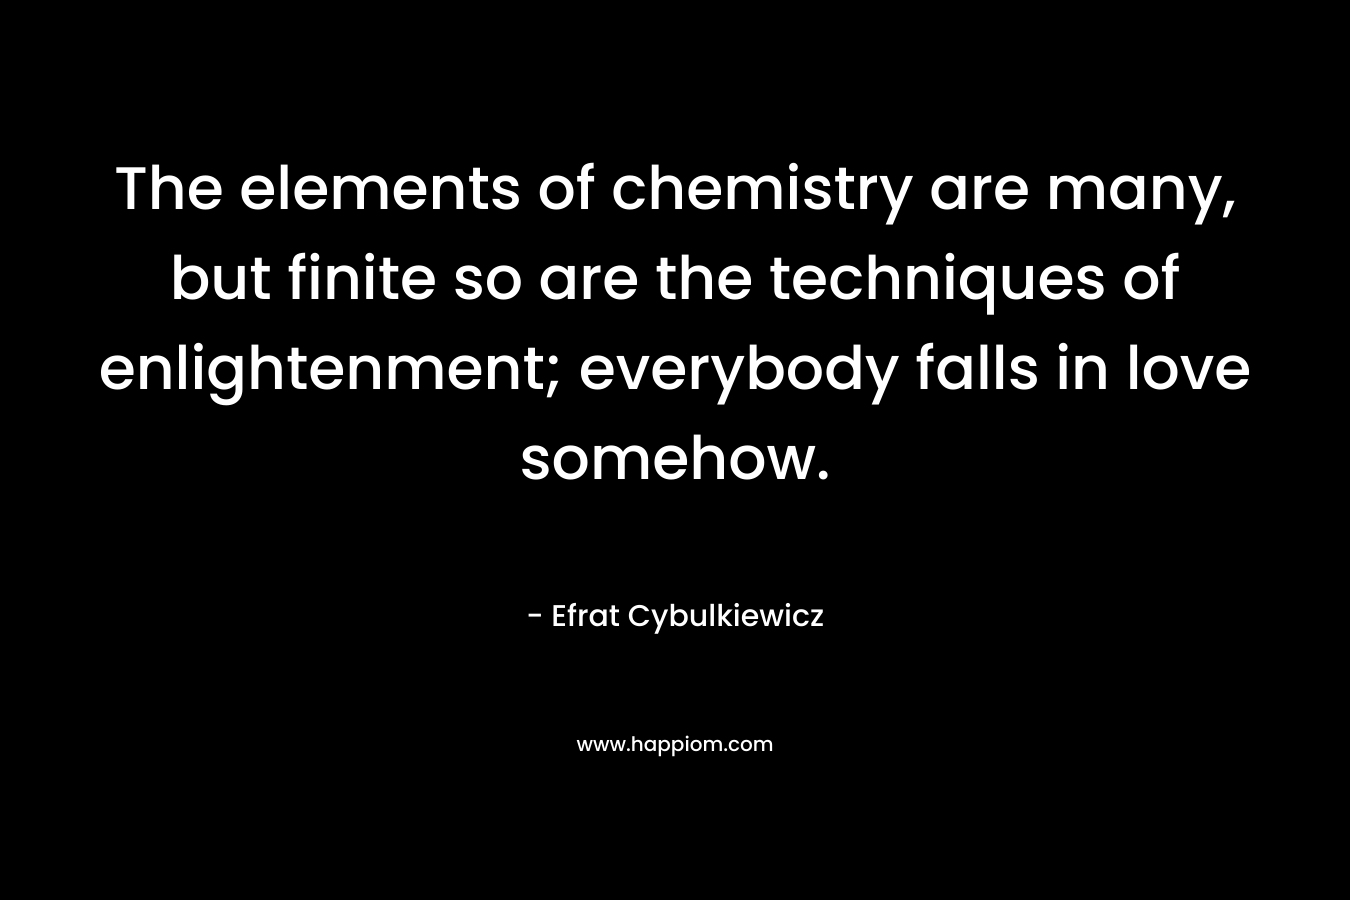 The elements of chemistry are many, but finite so are the techniques of enlightenment; everybody falls in love somehow.